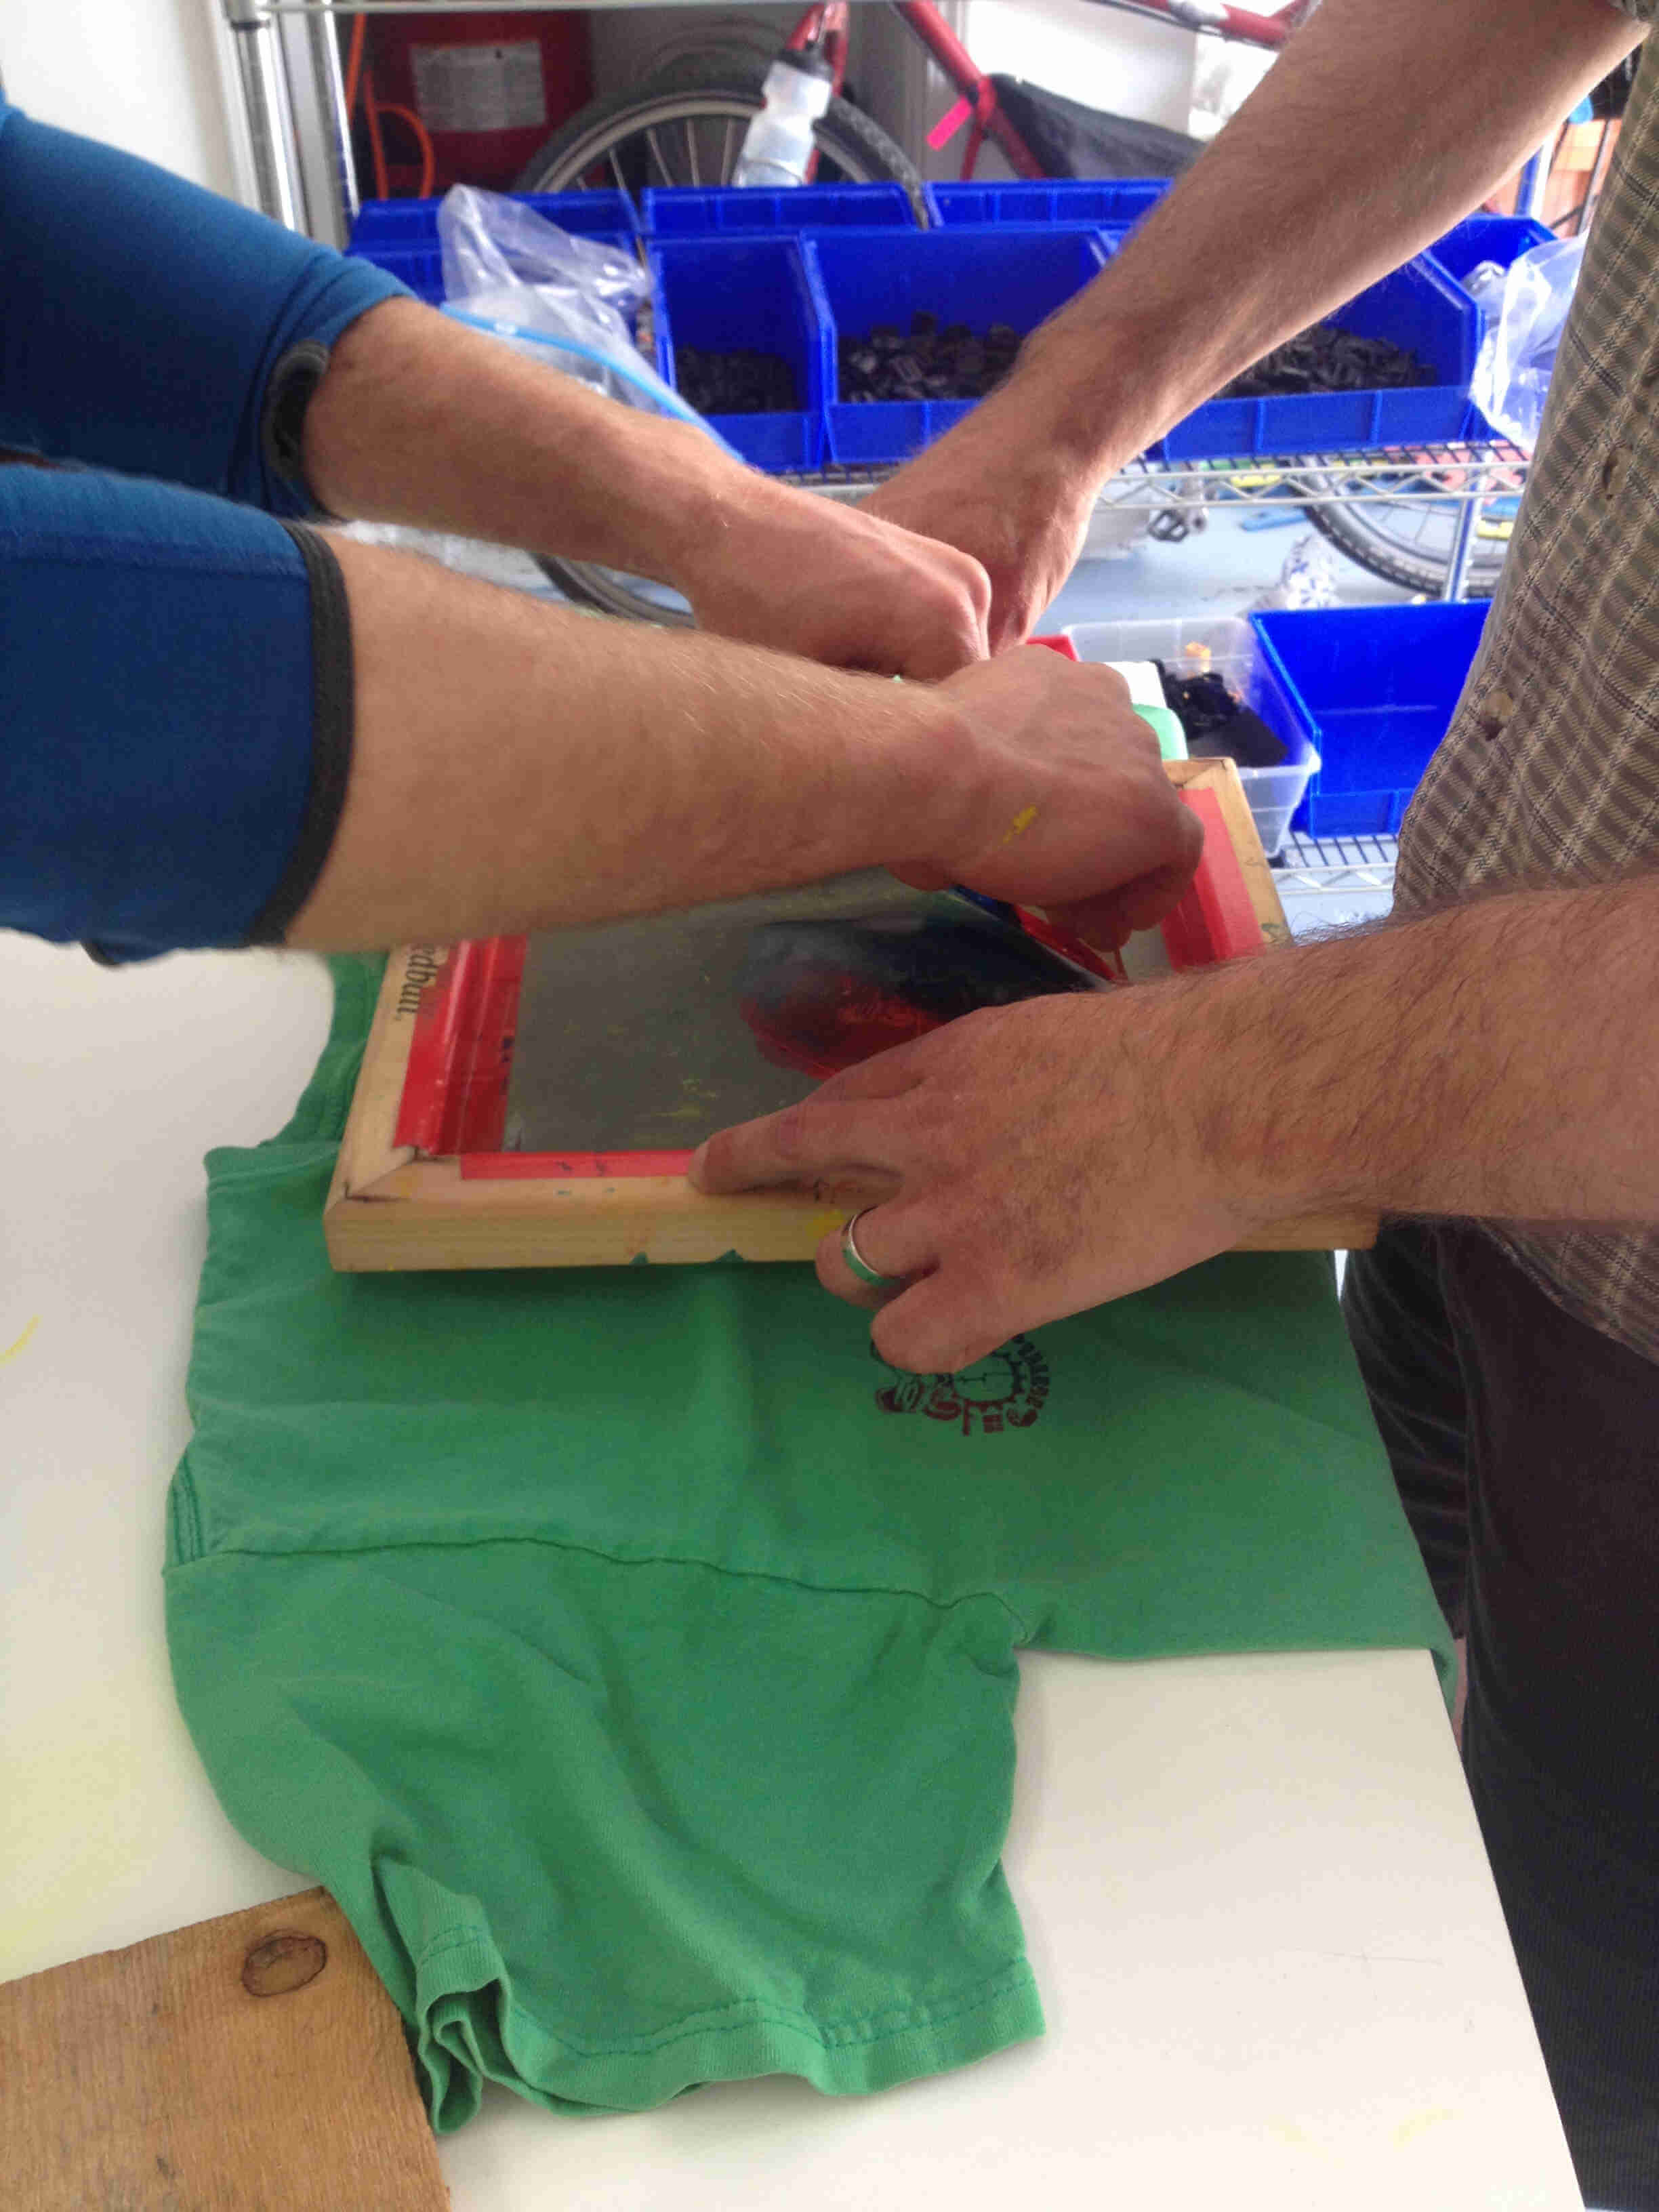 Side view of 2 sets of hands, from people standing across from each other, silk-screening a green t-shirt together